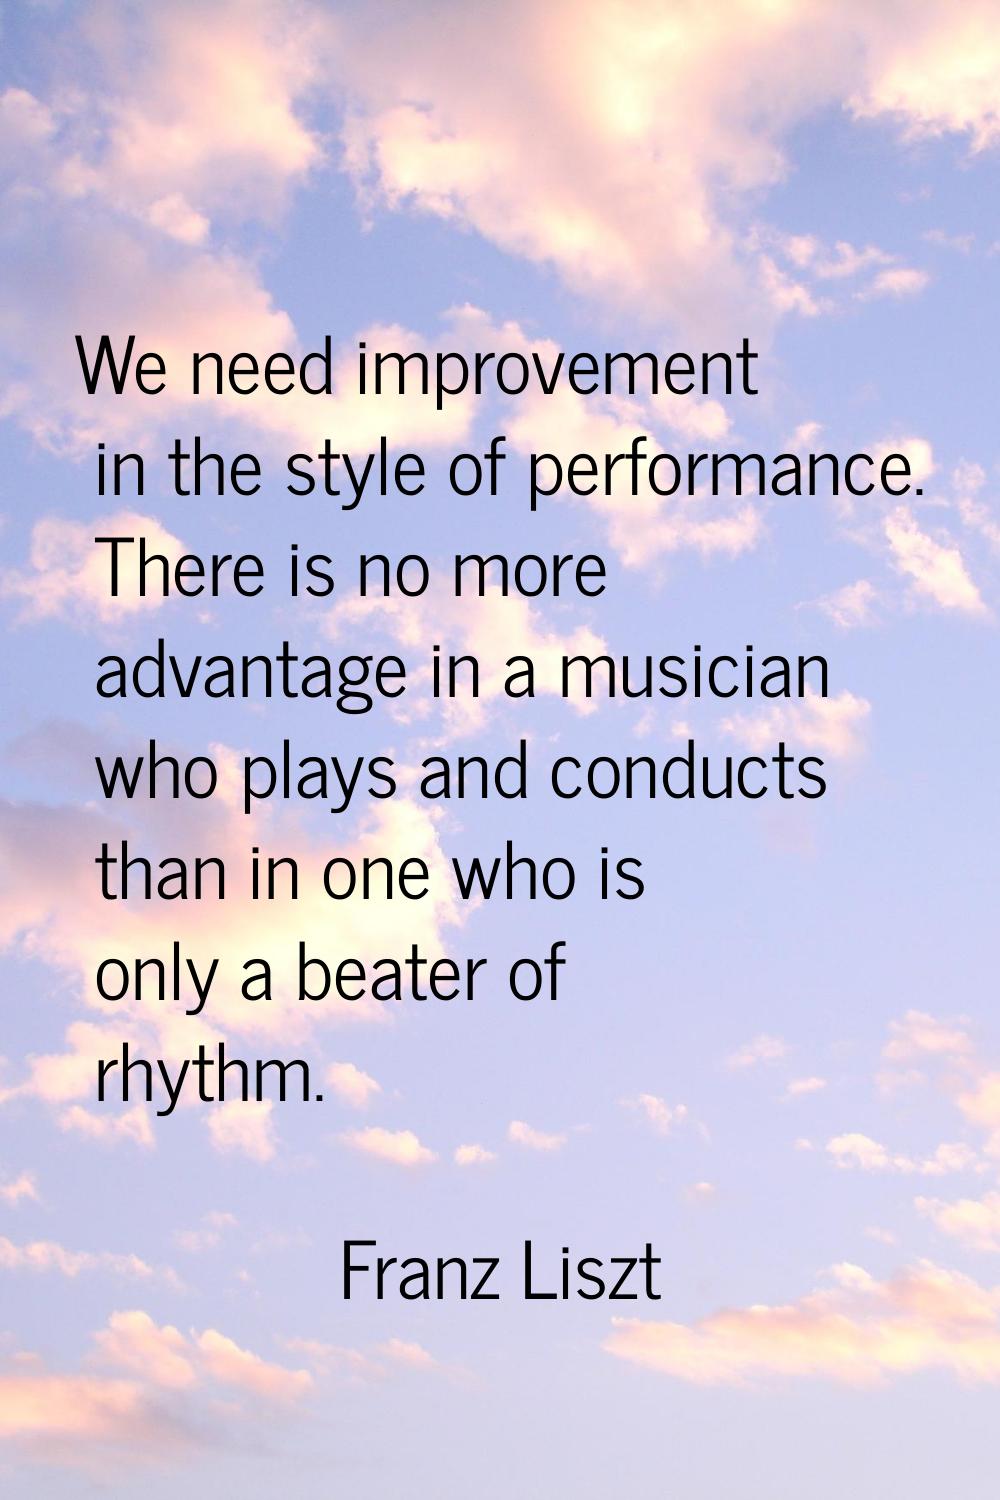 We need improvement in the style of performance. There is no more advantage in a musician who plays